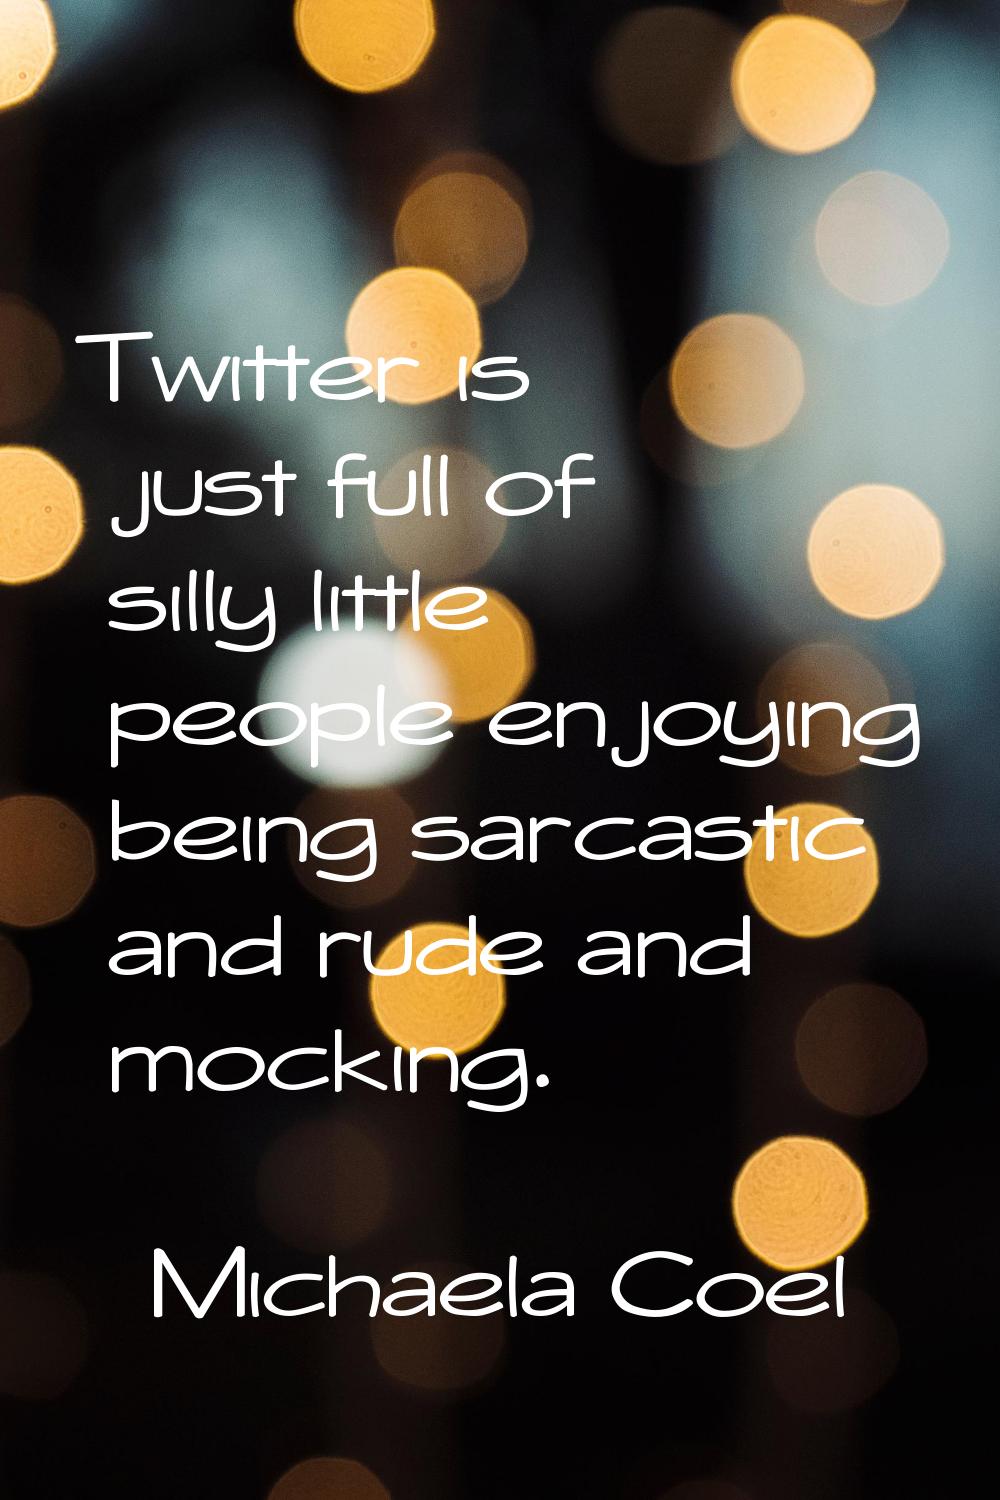 Twitter is just full of silly little people enjoying being sarcastic and rude and mocking.